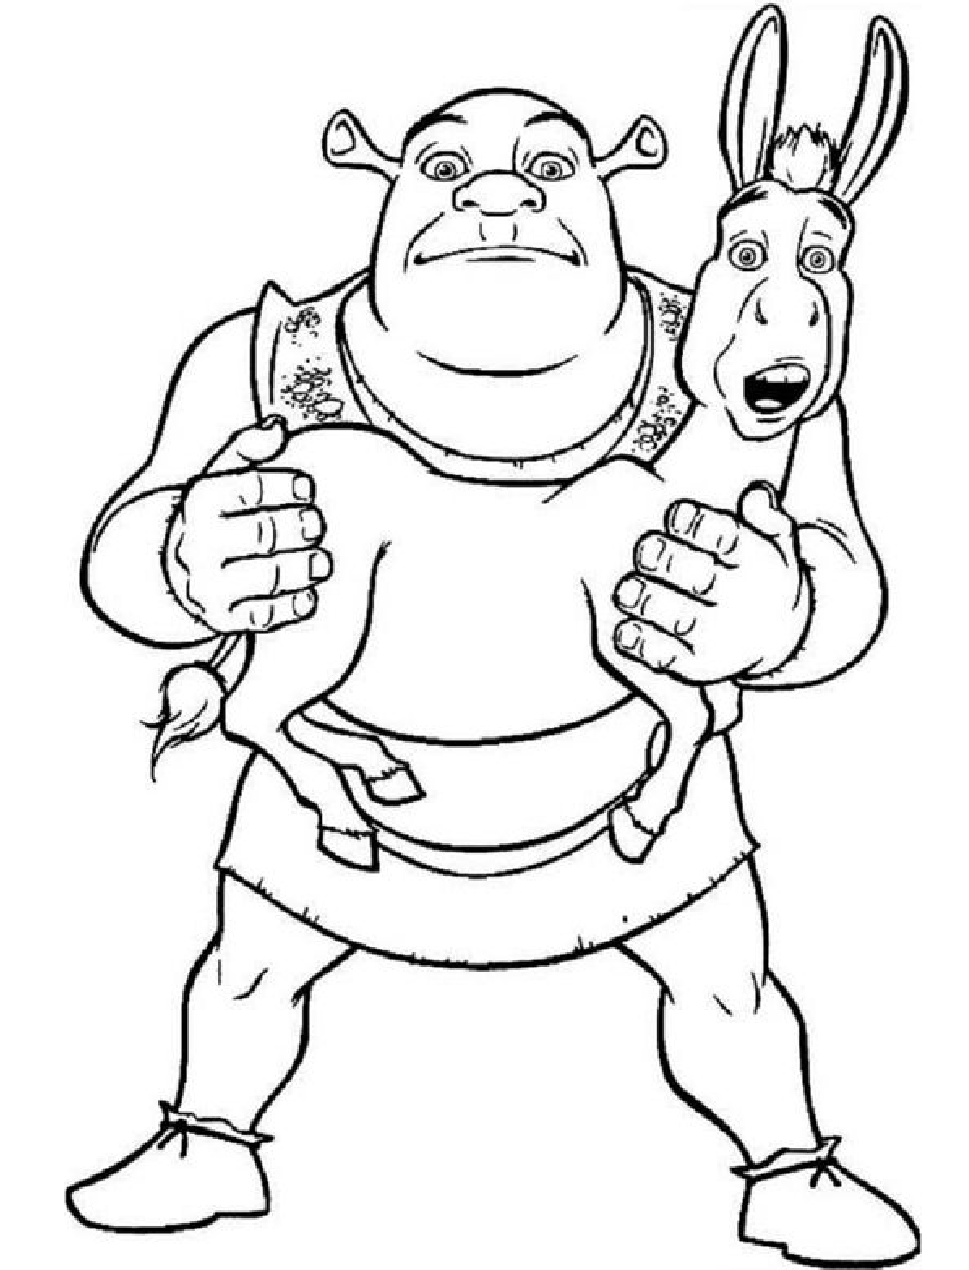 Download Shrek Coloring Pages - Free Printable Coloring Pages for Kids